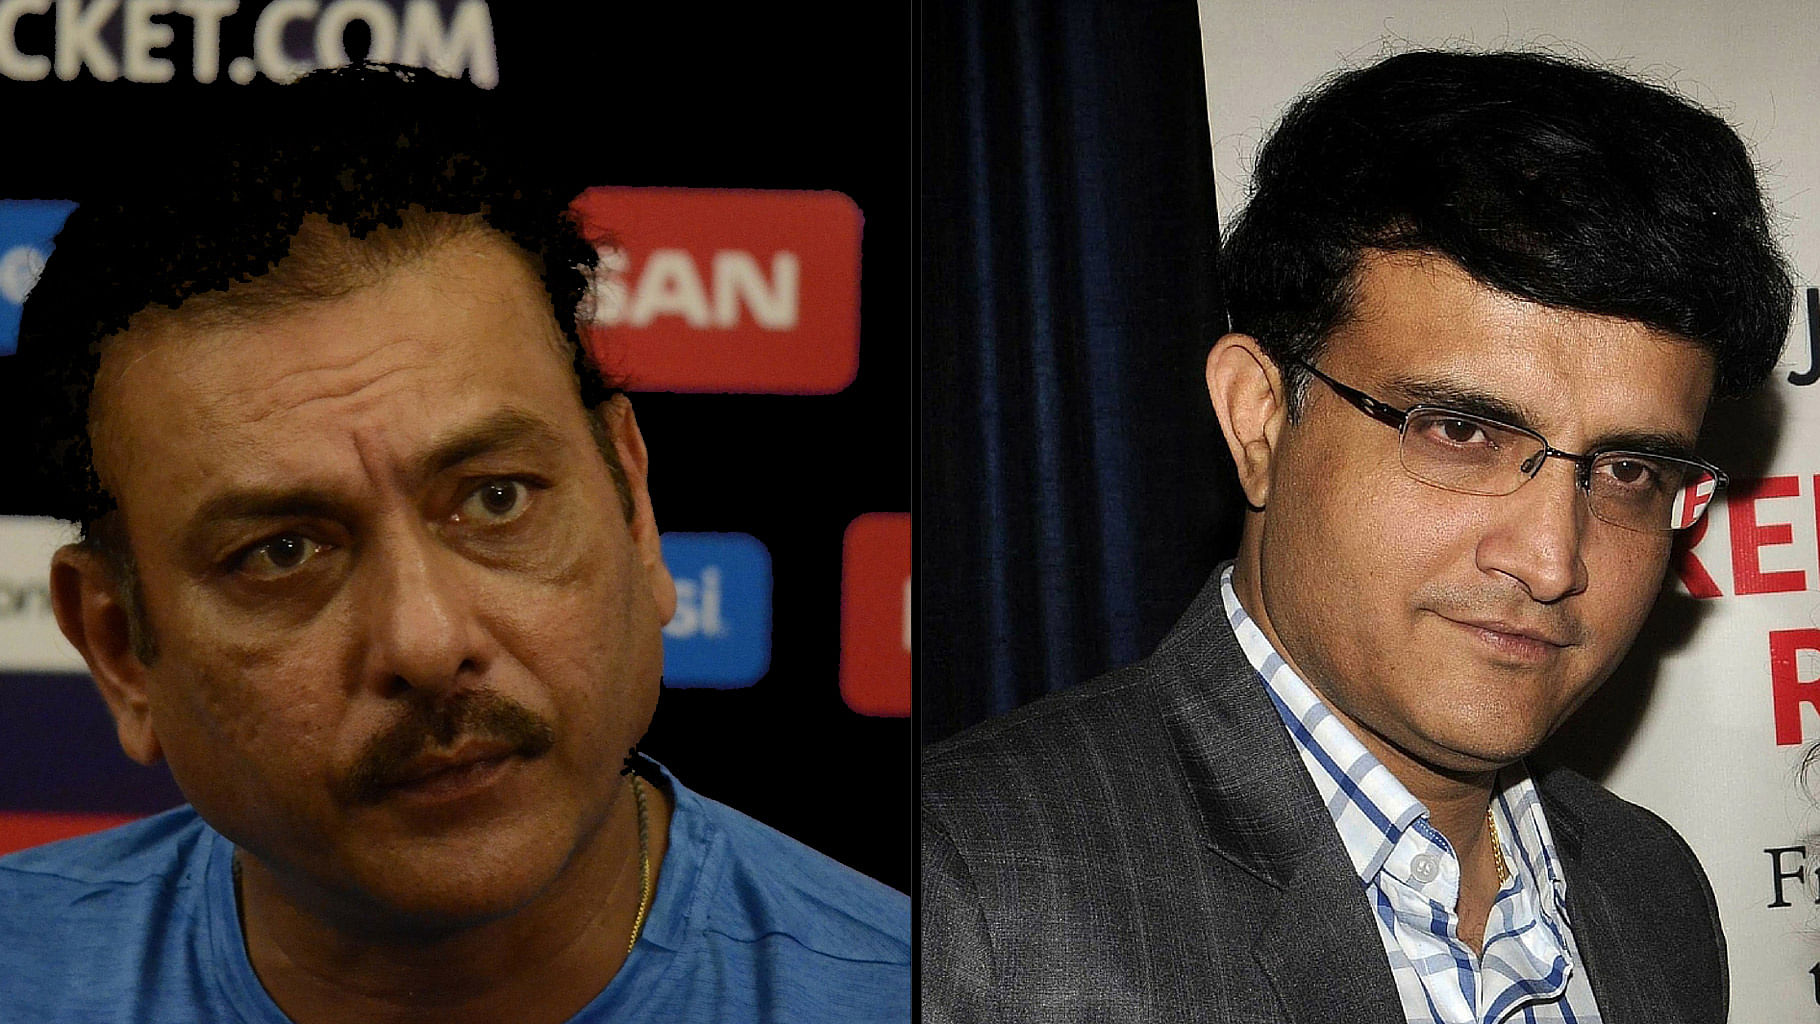 Ravi Shastri (left) and Sourav Ganguly (right). (Photo: Altered by&nbsp;<b>The Quint</b>)